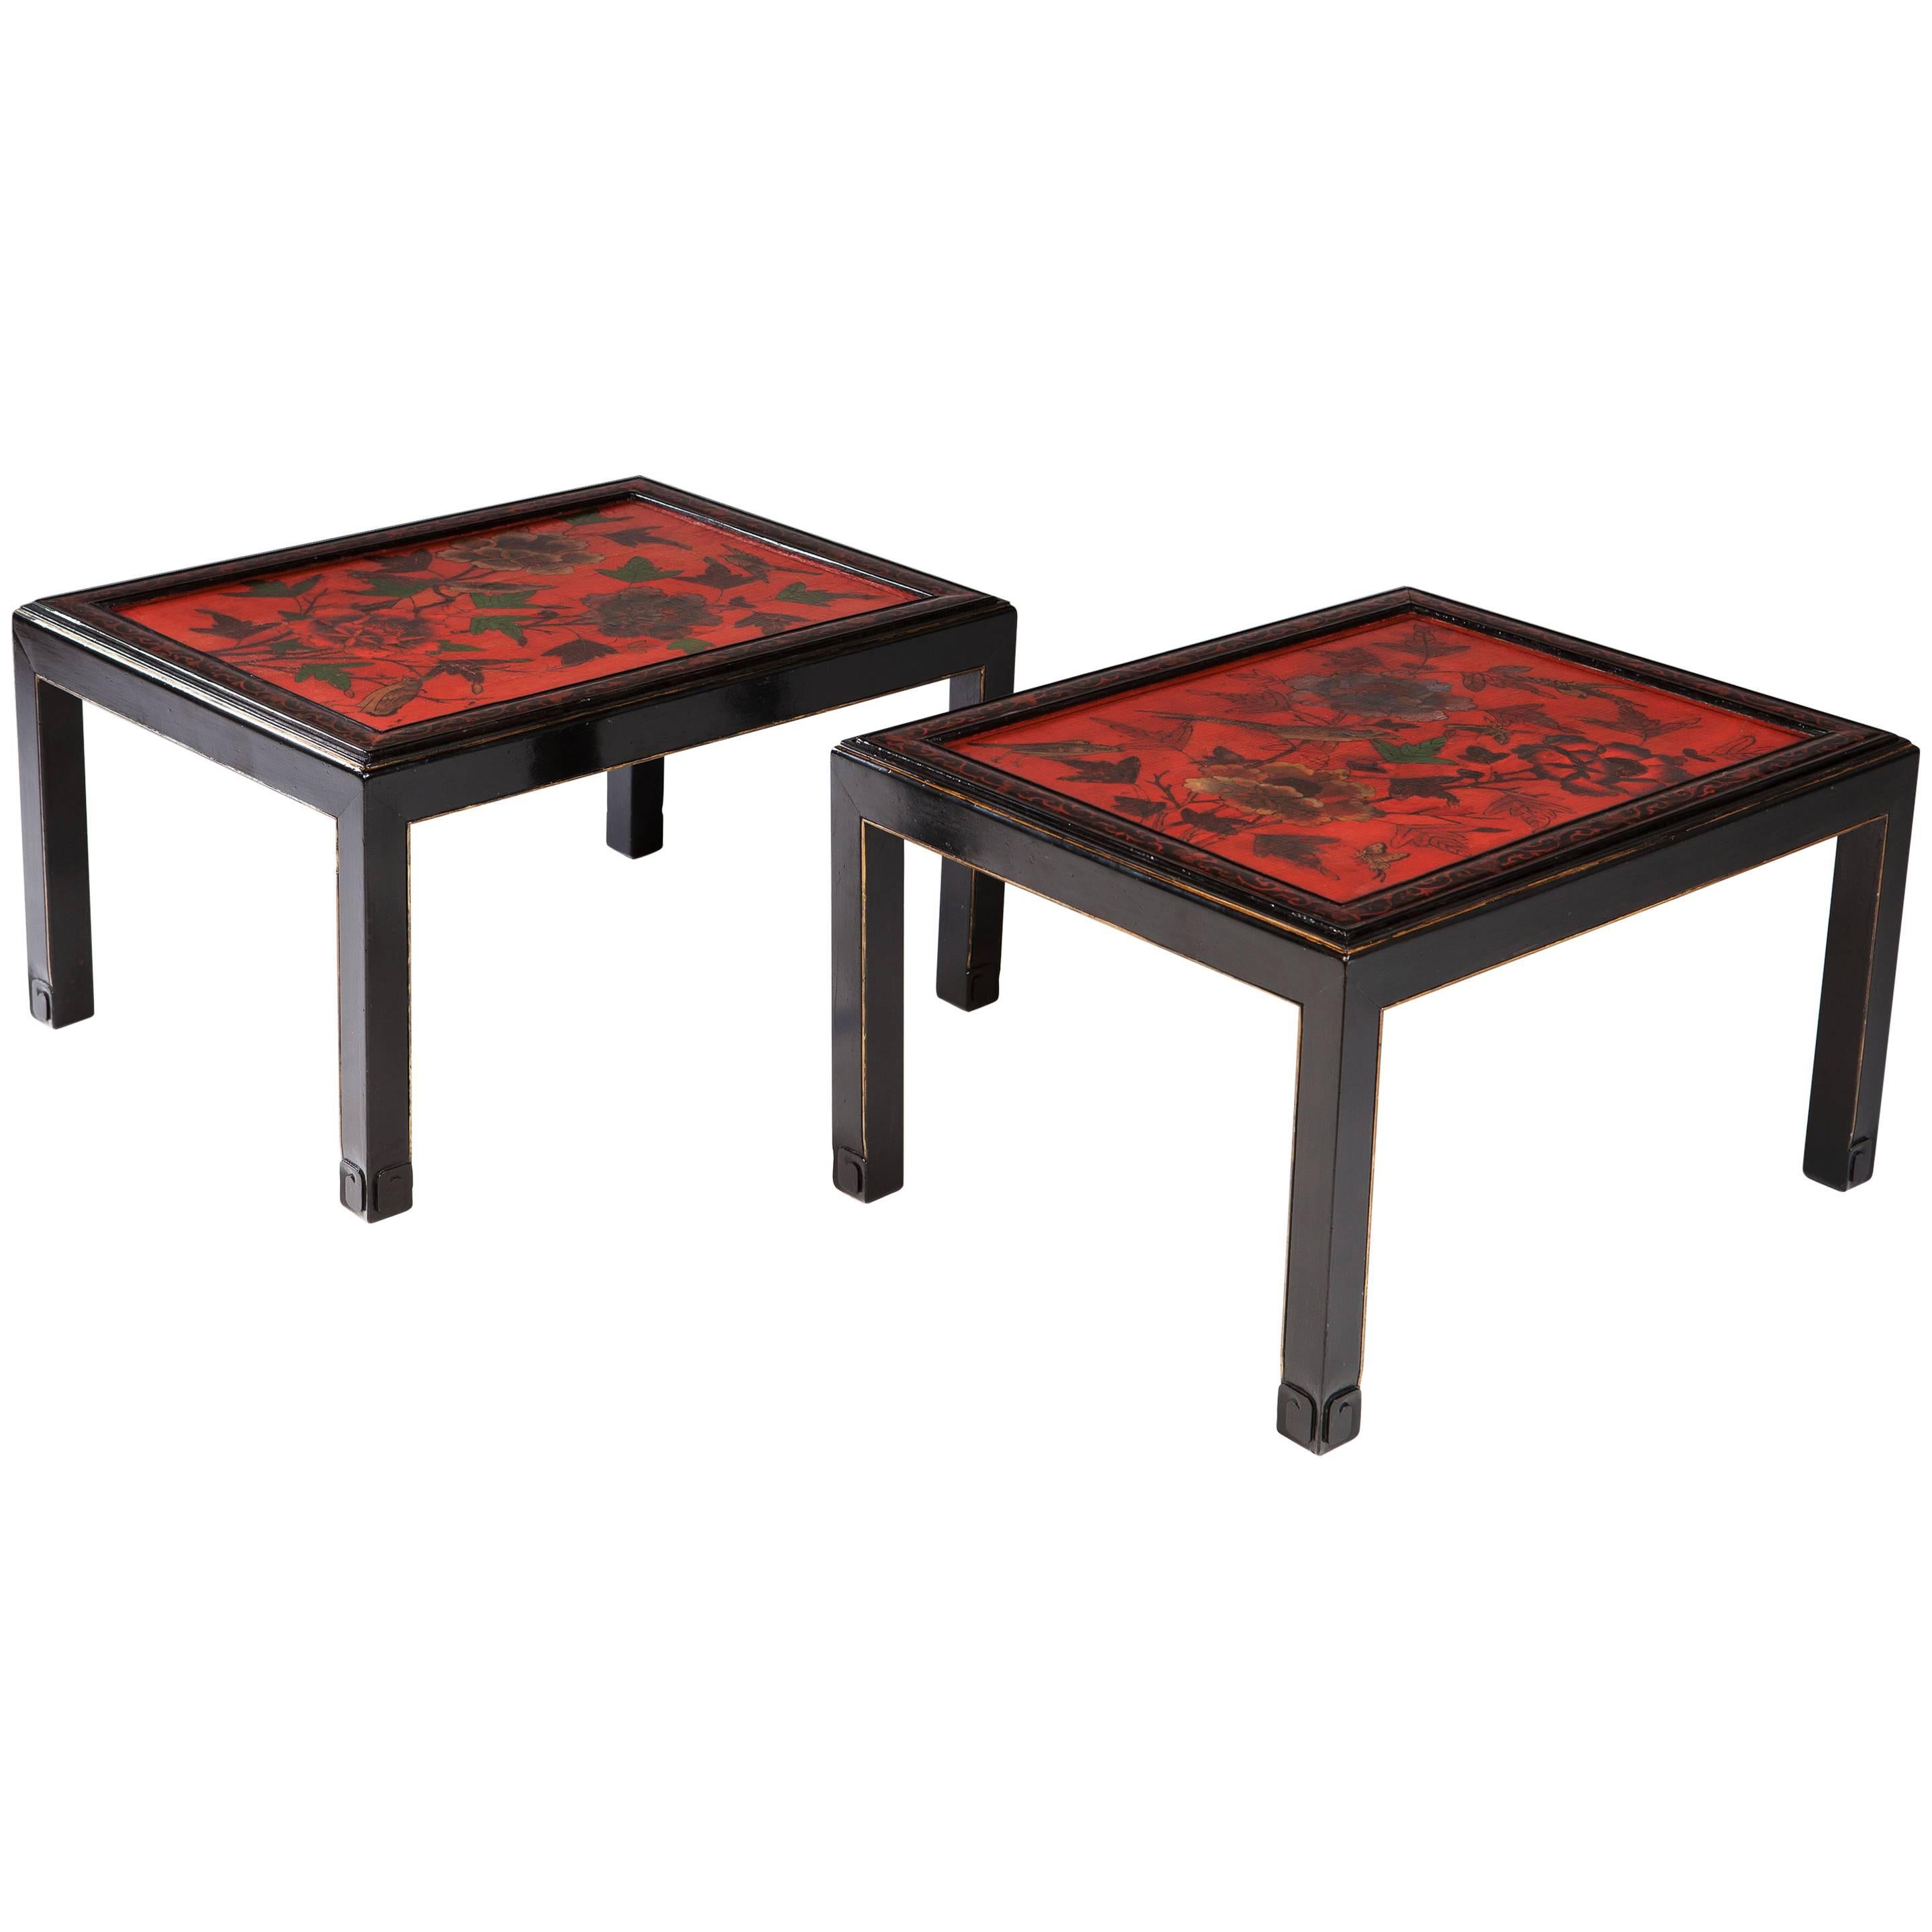 Pair of Chinese Red Lacquer End Tables